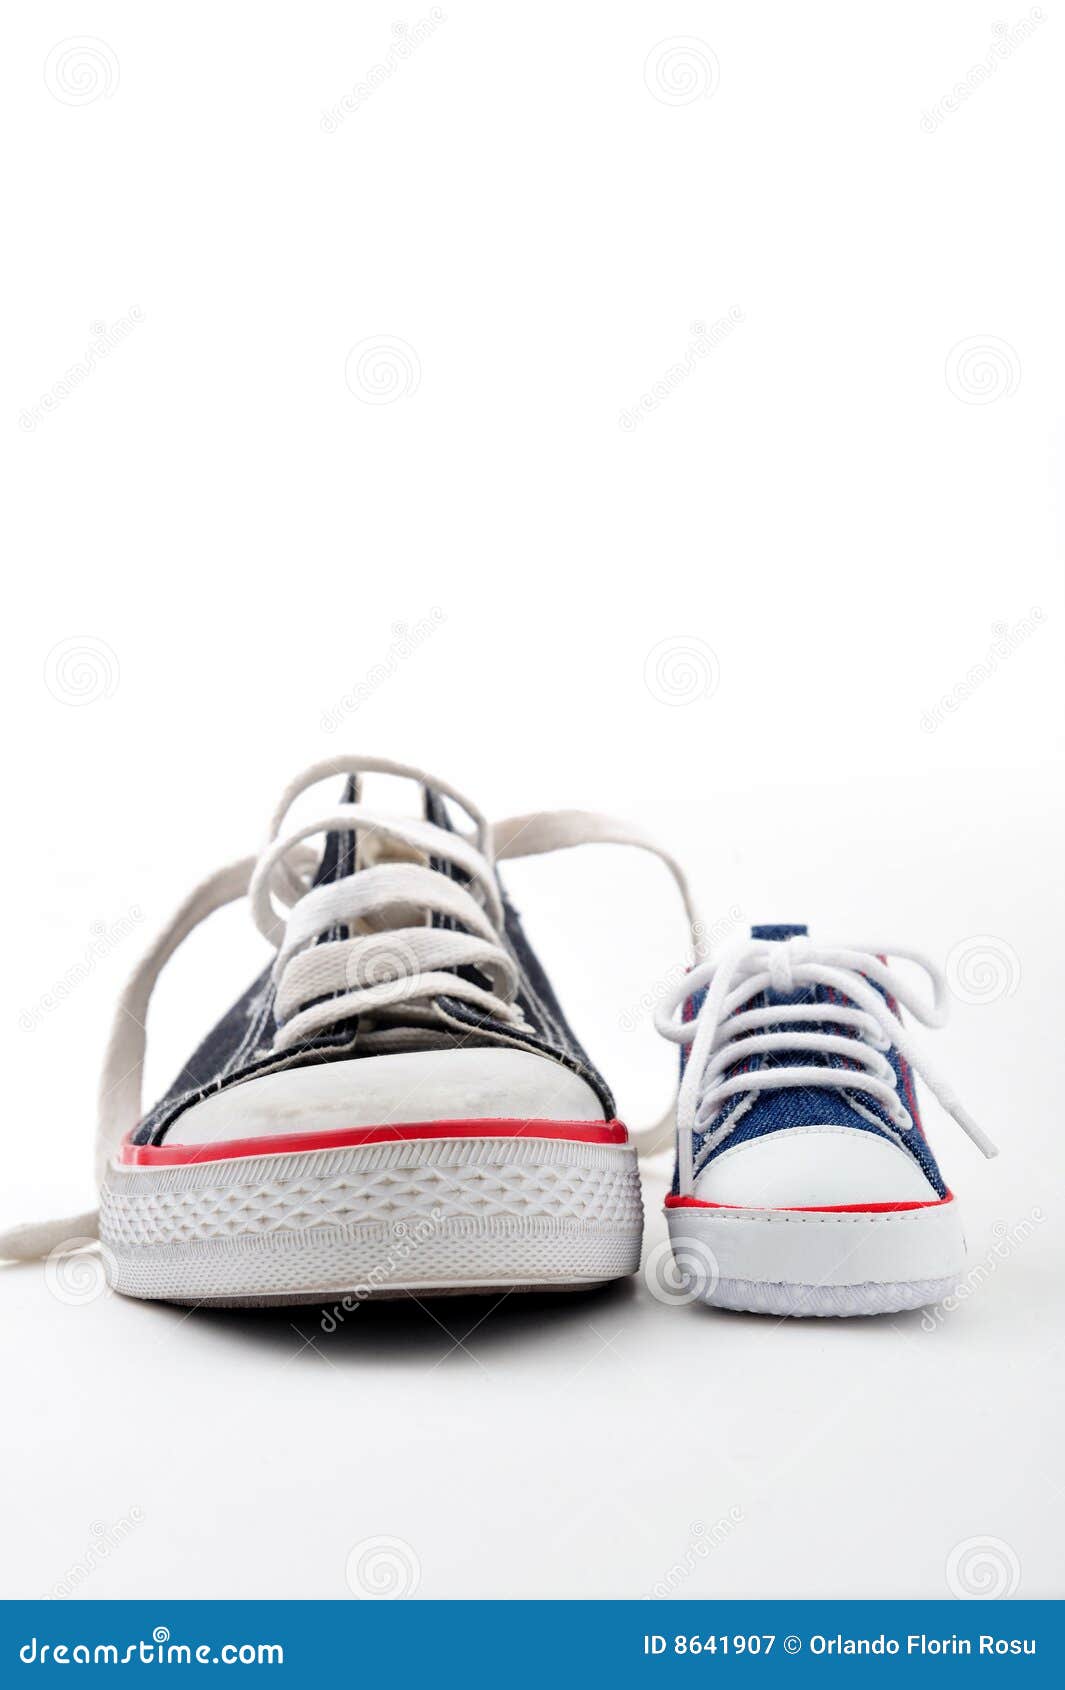 Father ans son shoes stock image. Image of basketball - 8641907